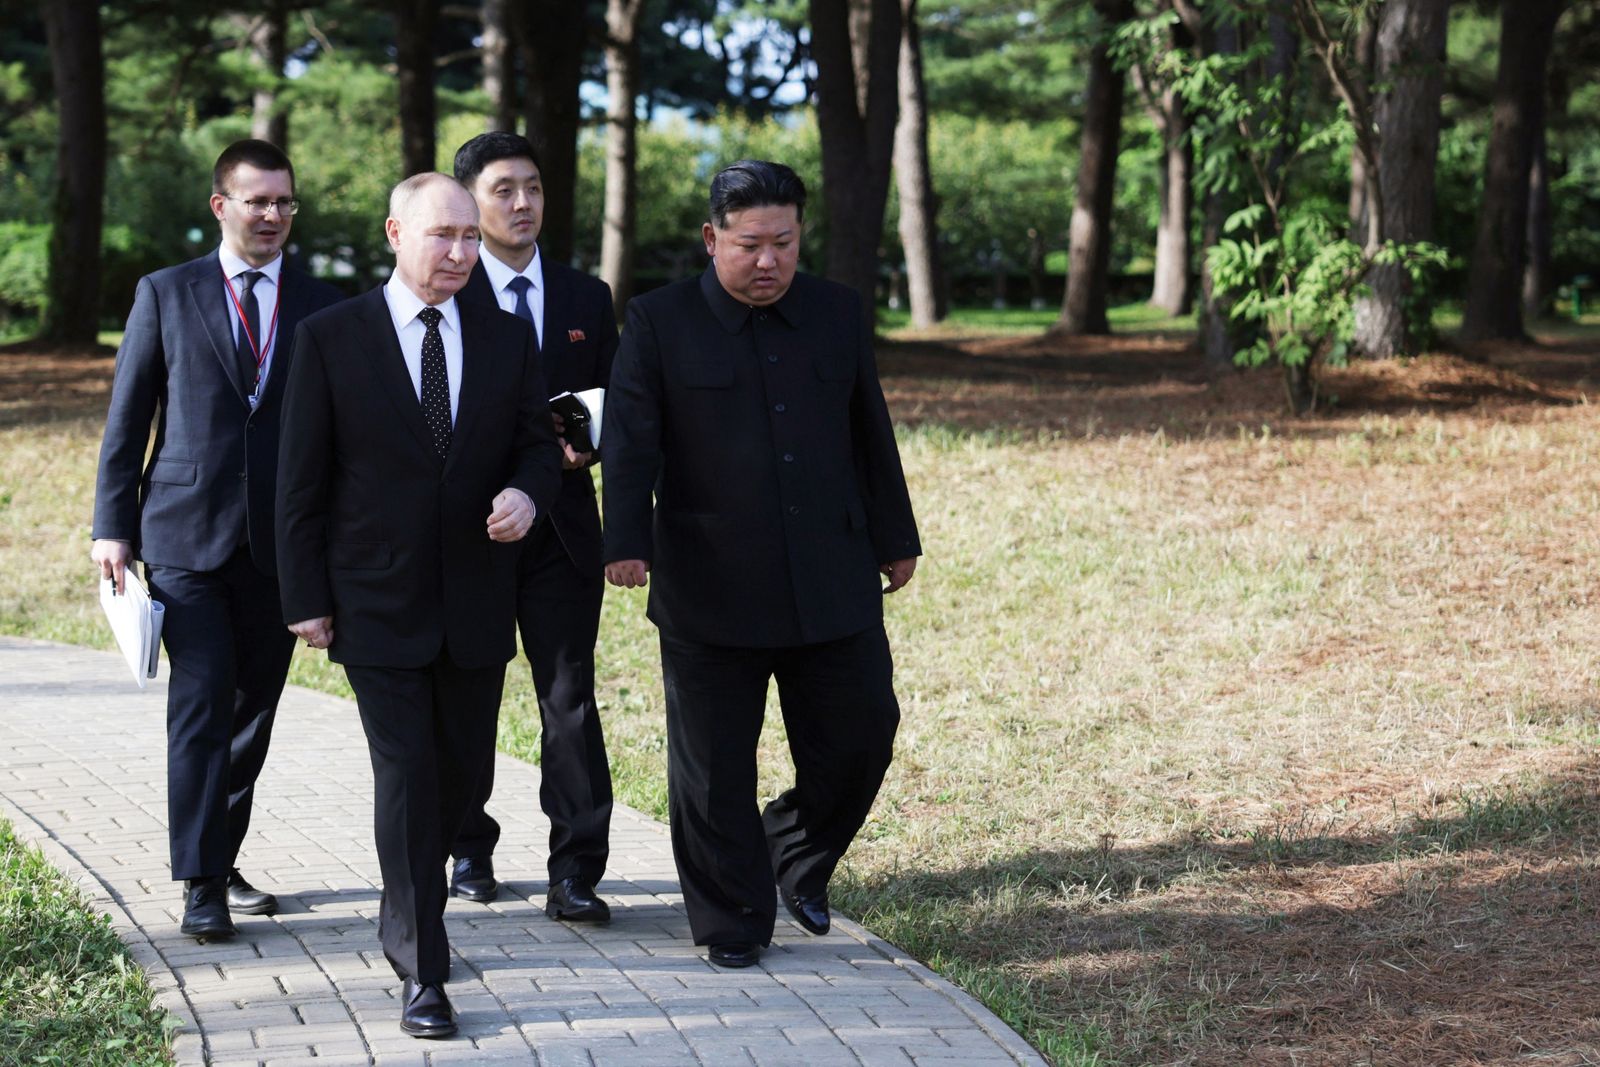 In this pool photograph distributed by the Russian state agency Sputnik, Russian President Vladimir Putin (2L) and North Korea's leader Kim Jong Un (R) walk during their meeting in Pyongyang, on June 19, 2024. Russian President Vladimir Putin signed a mutual defence agreement on June 19 with North Korea's Kim Jong Un, who offered his 'full support' on Ukraine. The pledge of military cooperation was part of a strategic treaty signed during a summit in Pyongyang, where Putin was making his first visit in 24 years. (Photo by Gavriil GRIGOROV / POOL / AFP) / -- Editor's note : this image is distributed by the Russian state owned agency Sputnik -